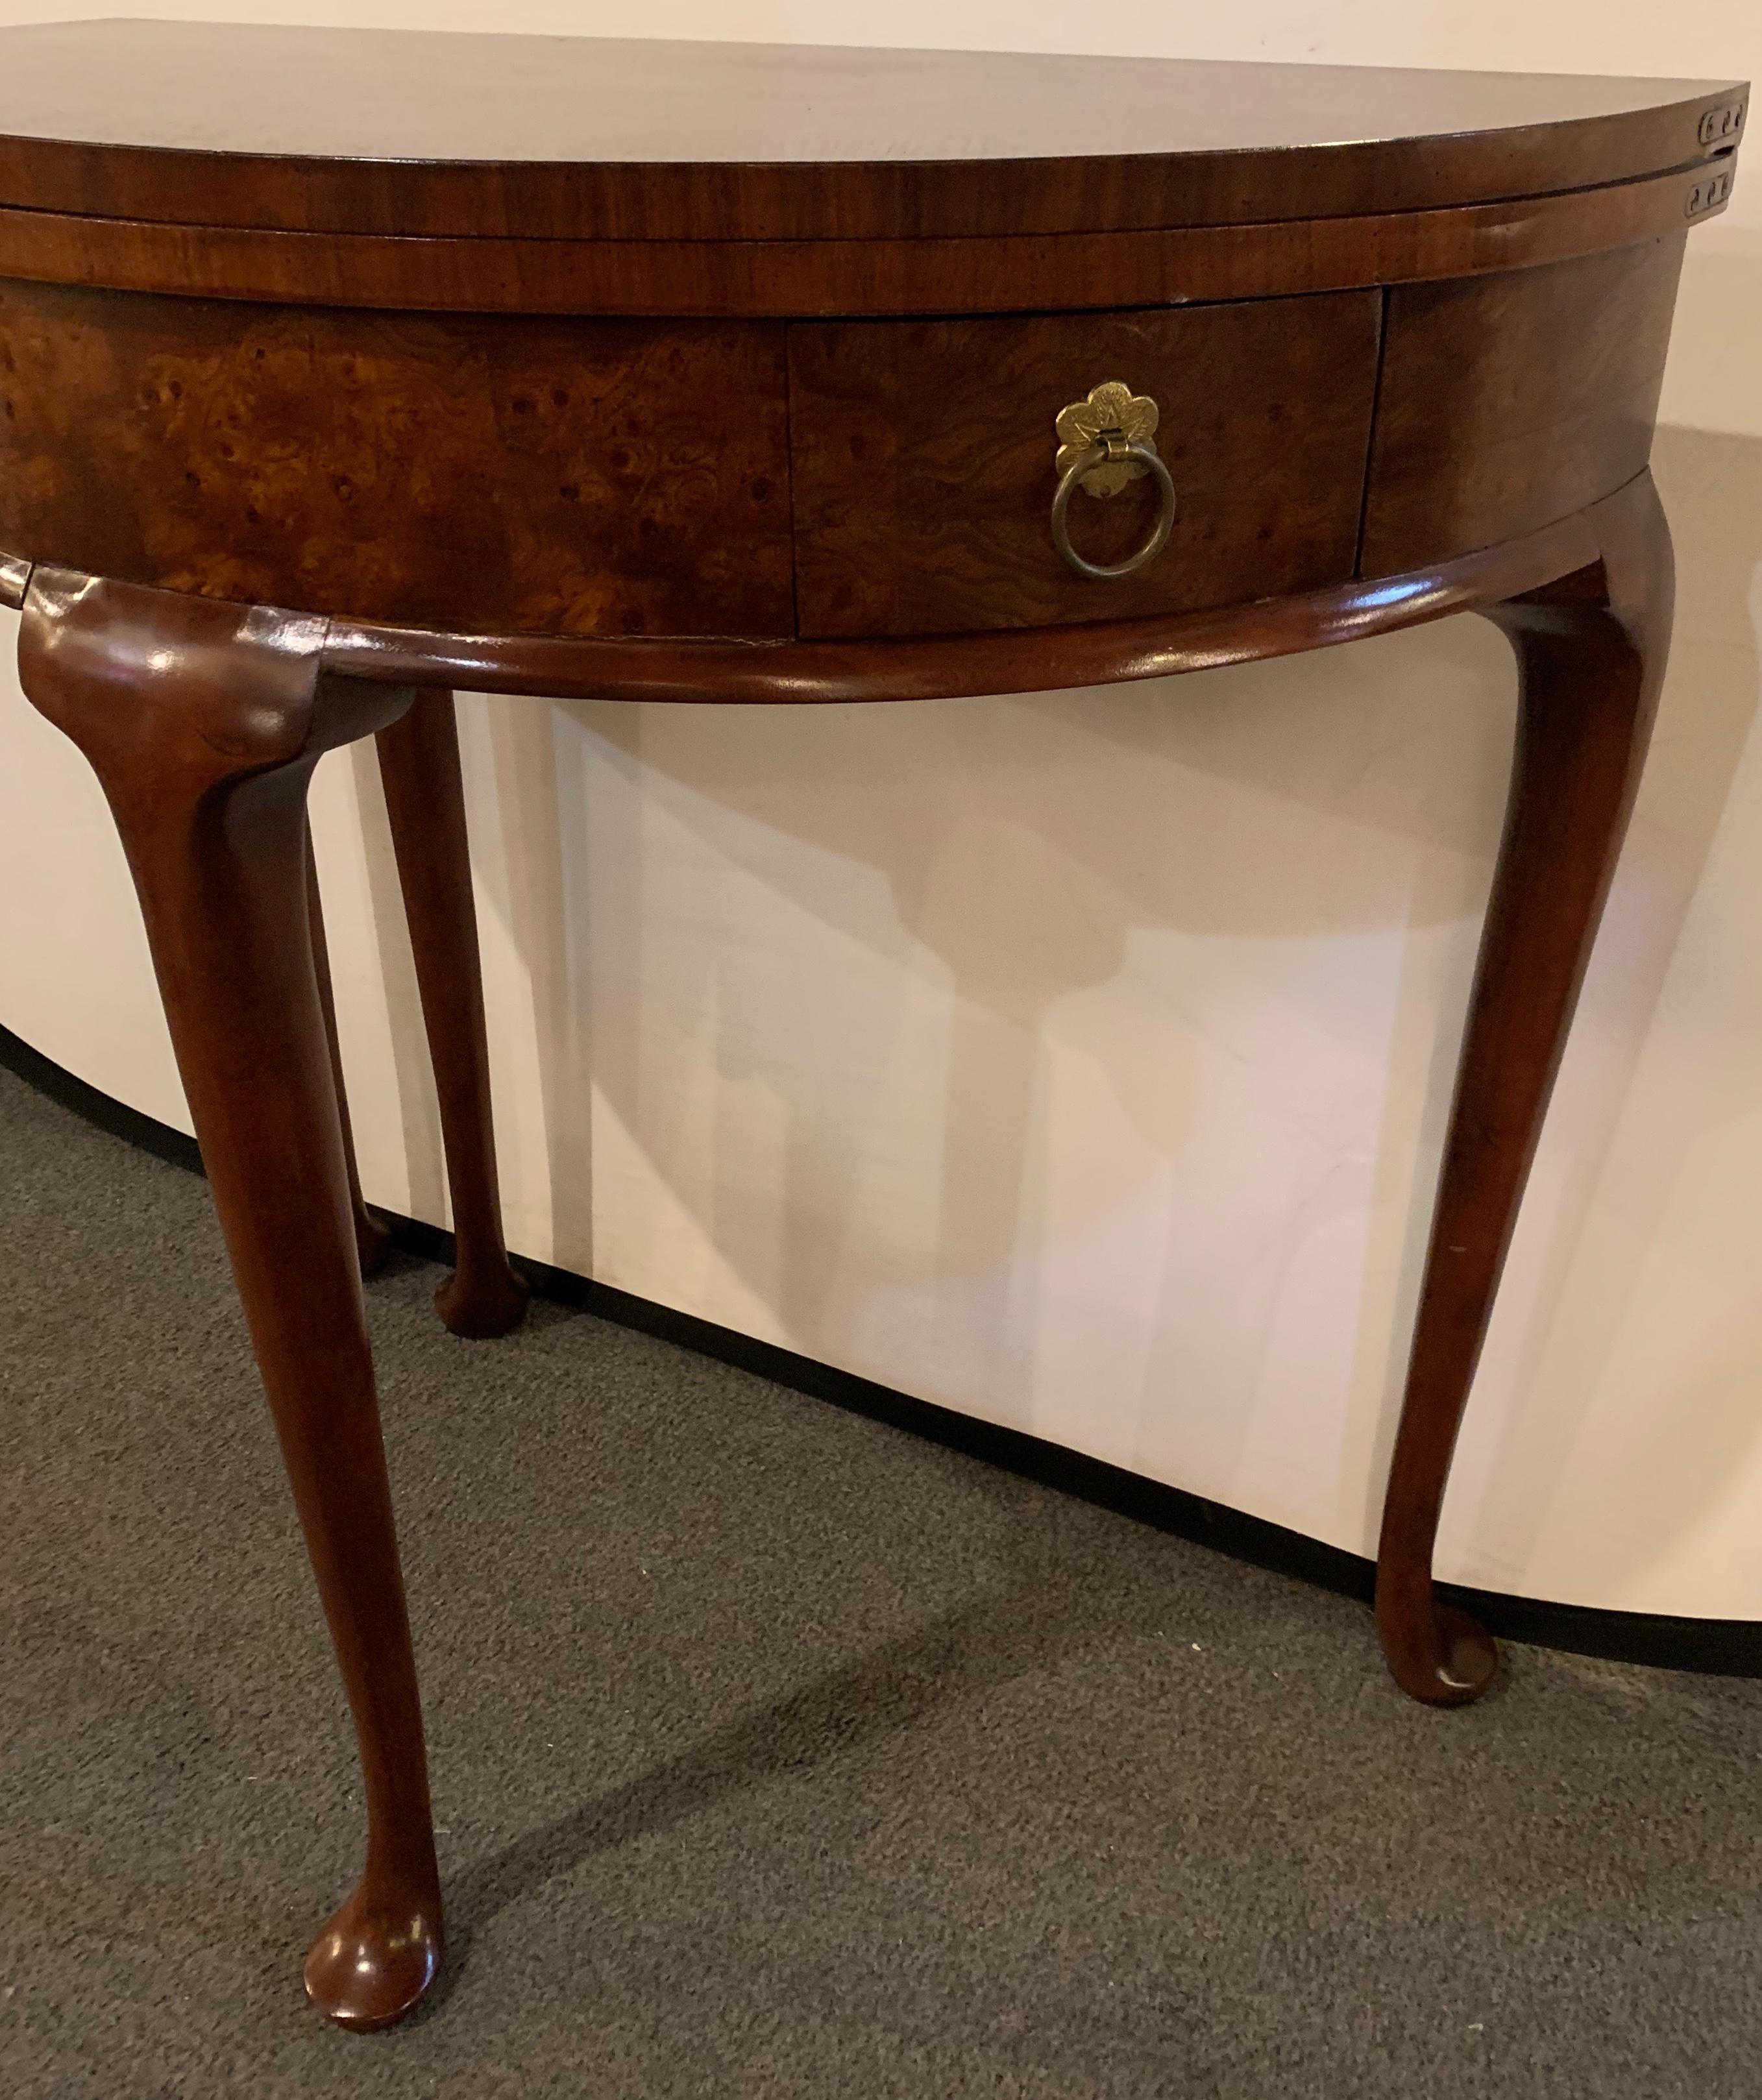 Georgian style baker mahogany demilune flip top end or card table. This stunning side table by this fine furniture manufacturer is simply breathtaking. The deep bow front having two drawers with fine pulls. The flip top makes this table multi